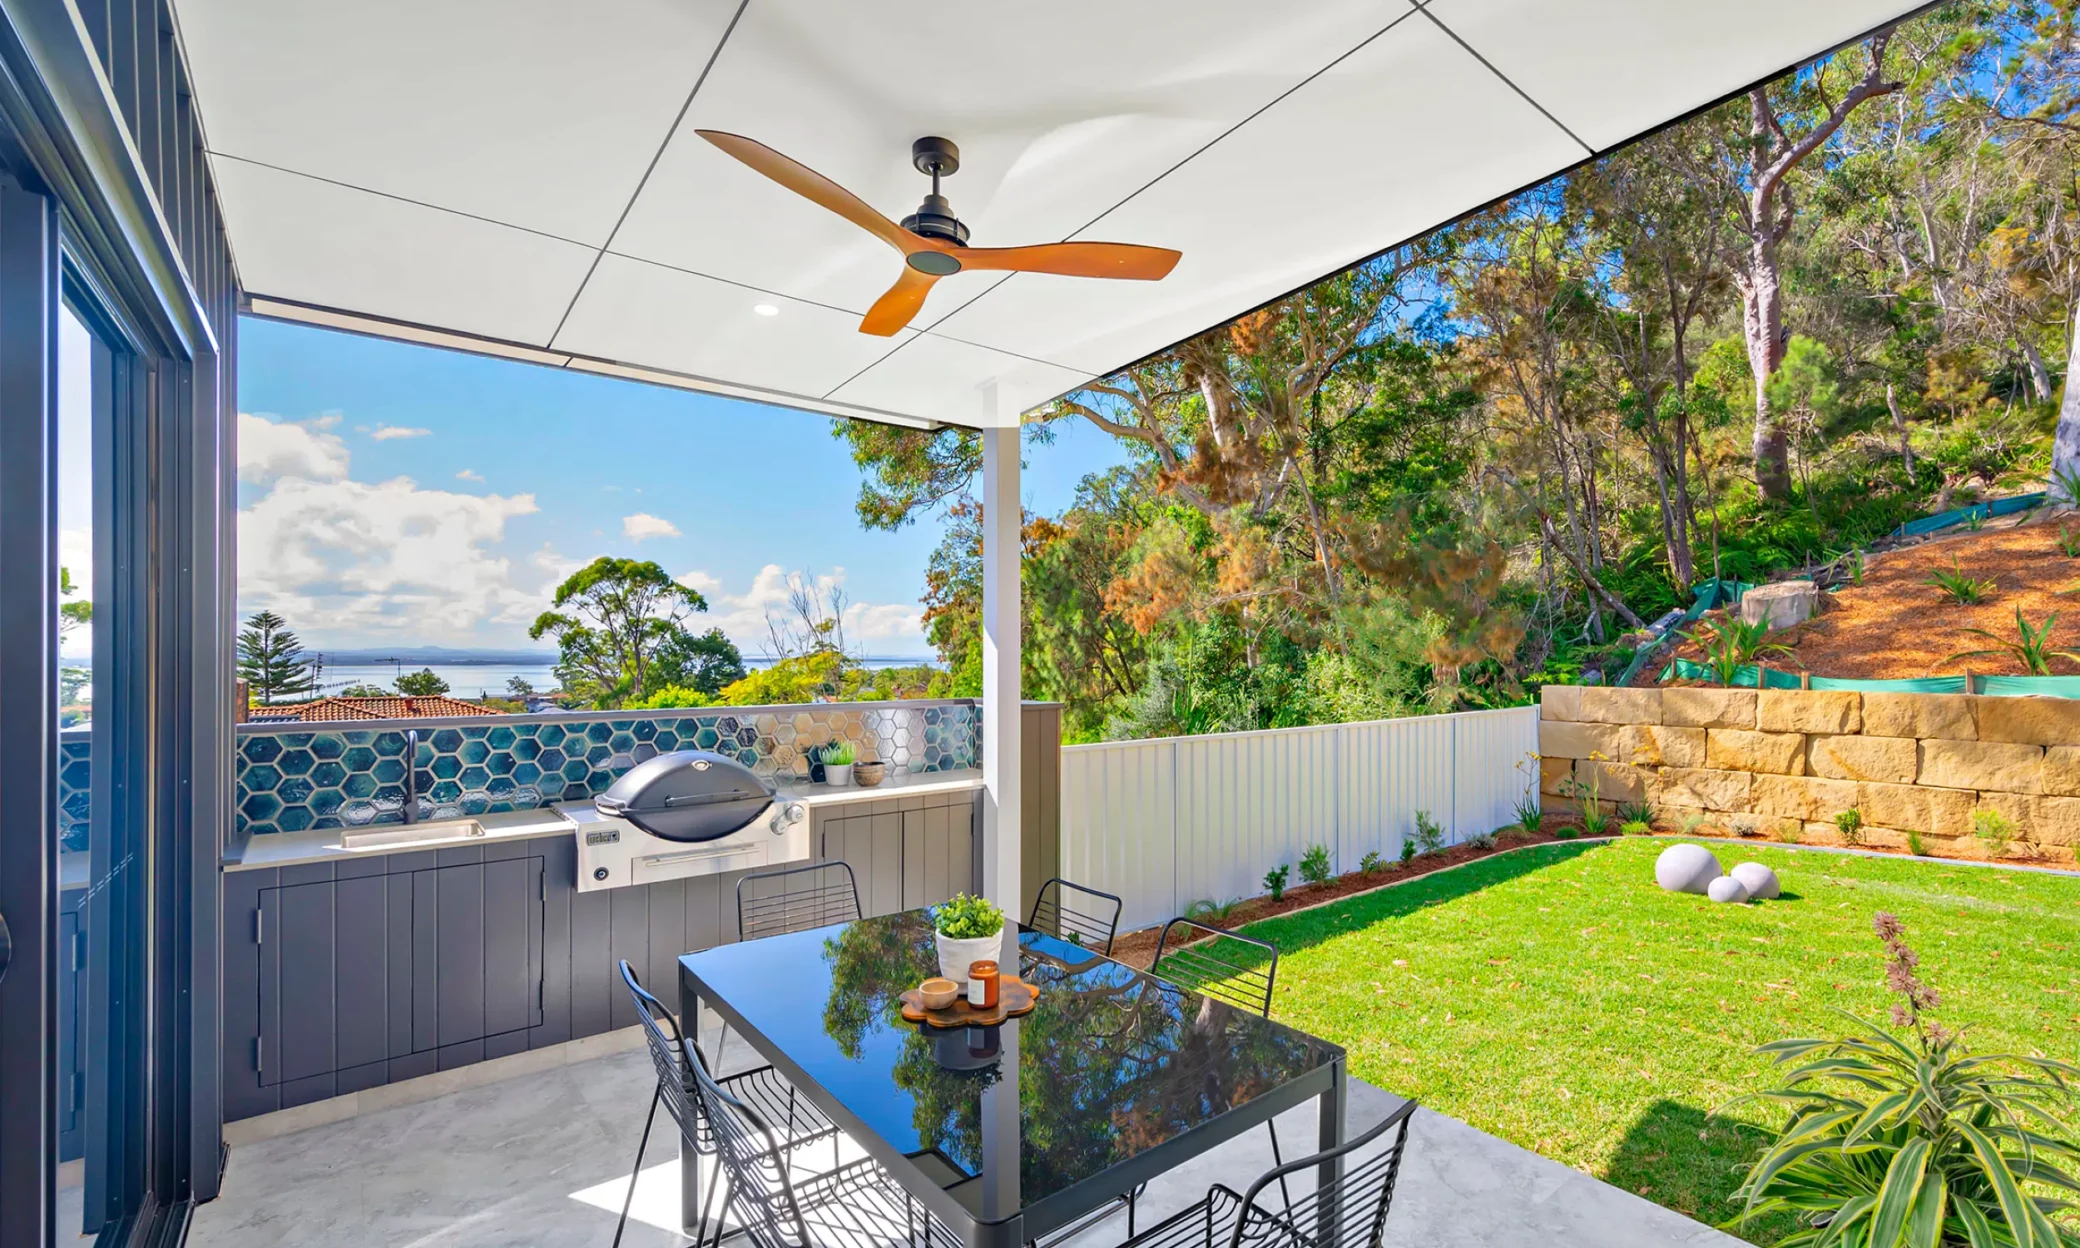 A modern outdoor patio in Port Stephens with a ceiling fan, dining area, barbecue grill, surrounded by lush greenery and a partial ocean view in the background, featuring vibrant blue accents on the furniture and